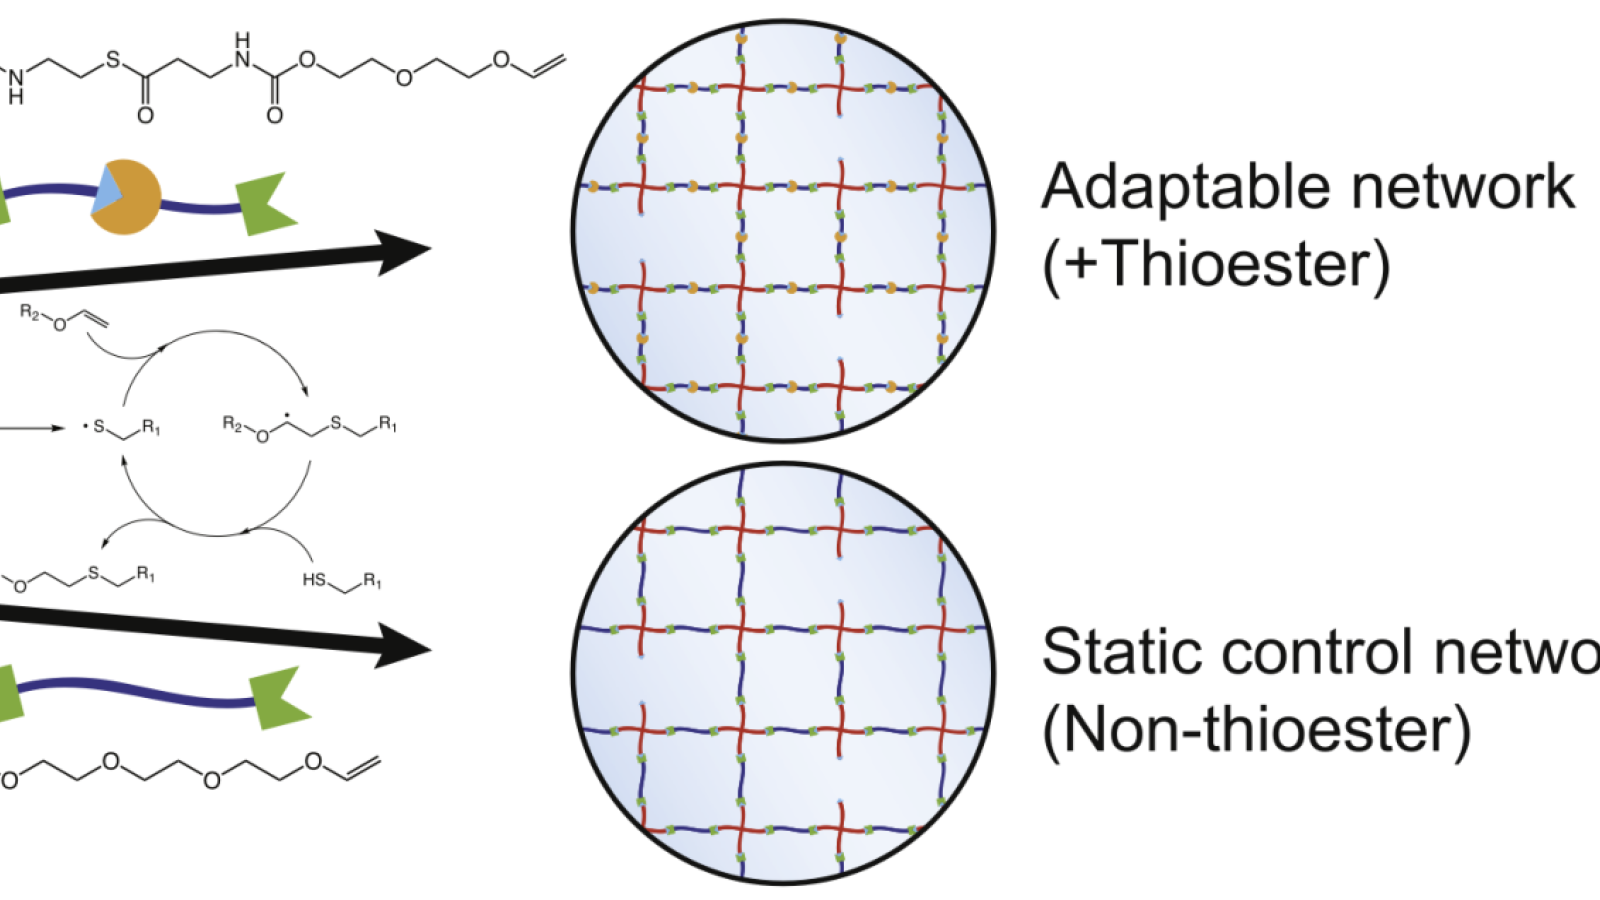 Thioester hydrogels formed through thiol-ene chemistry